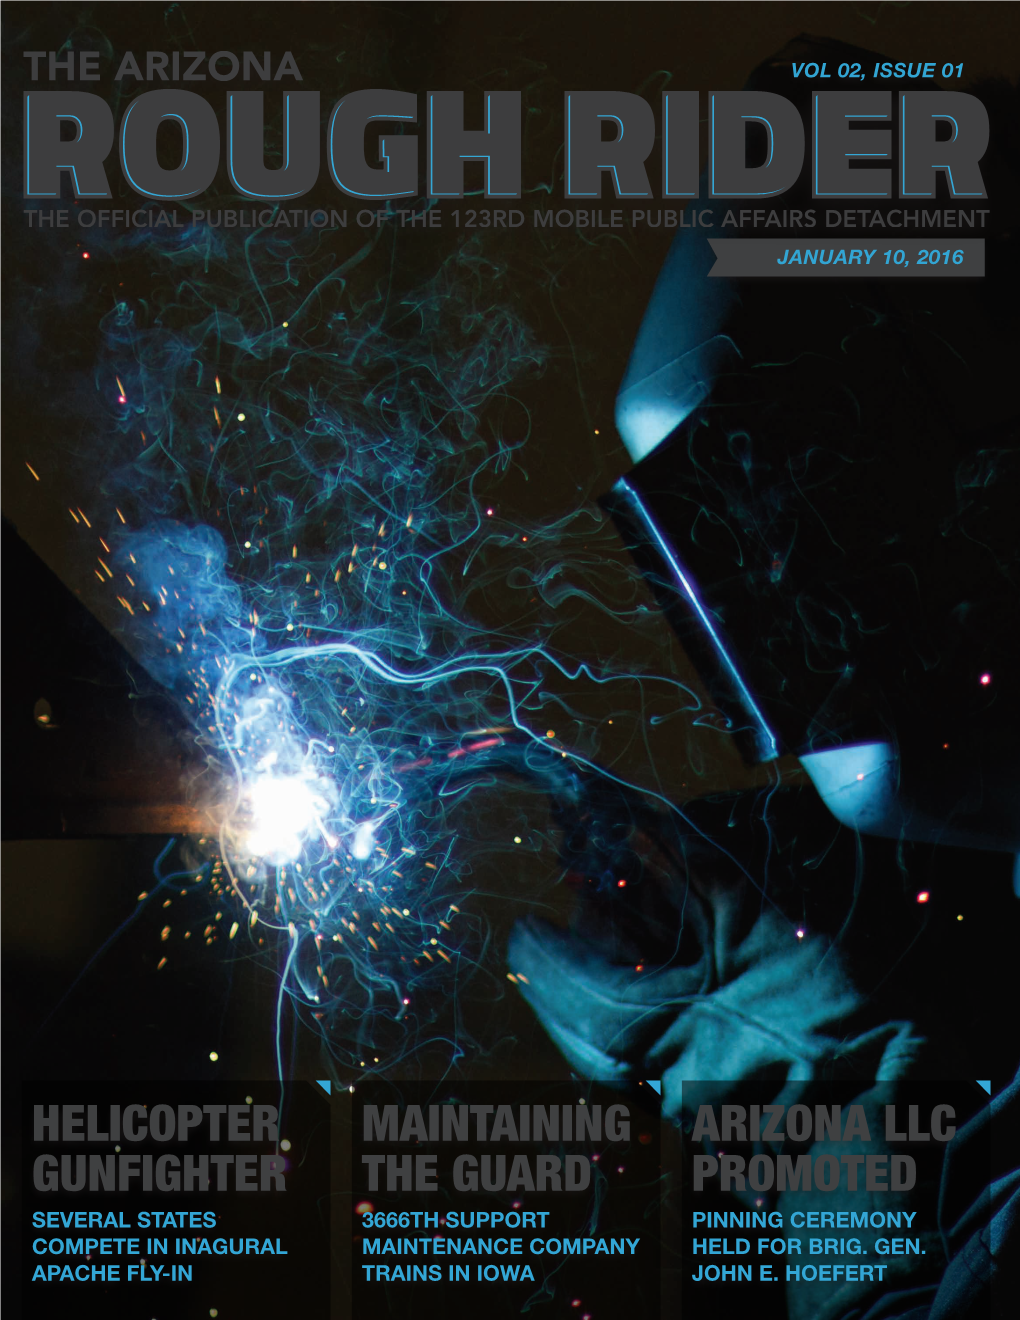 Maintaining the Guard Helicopter Gunfighter